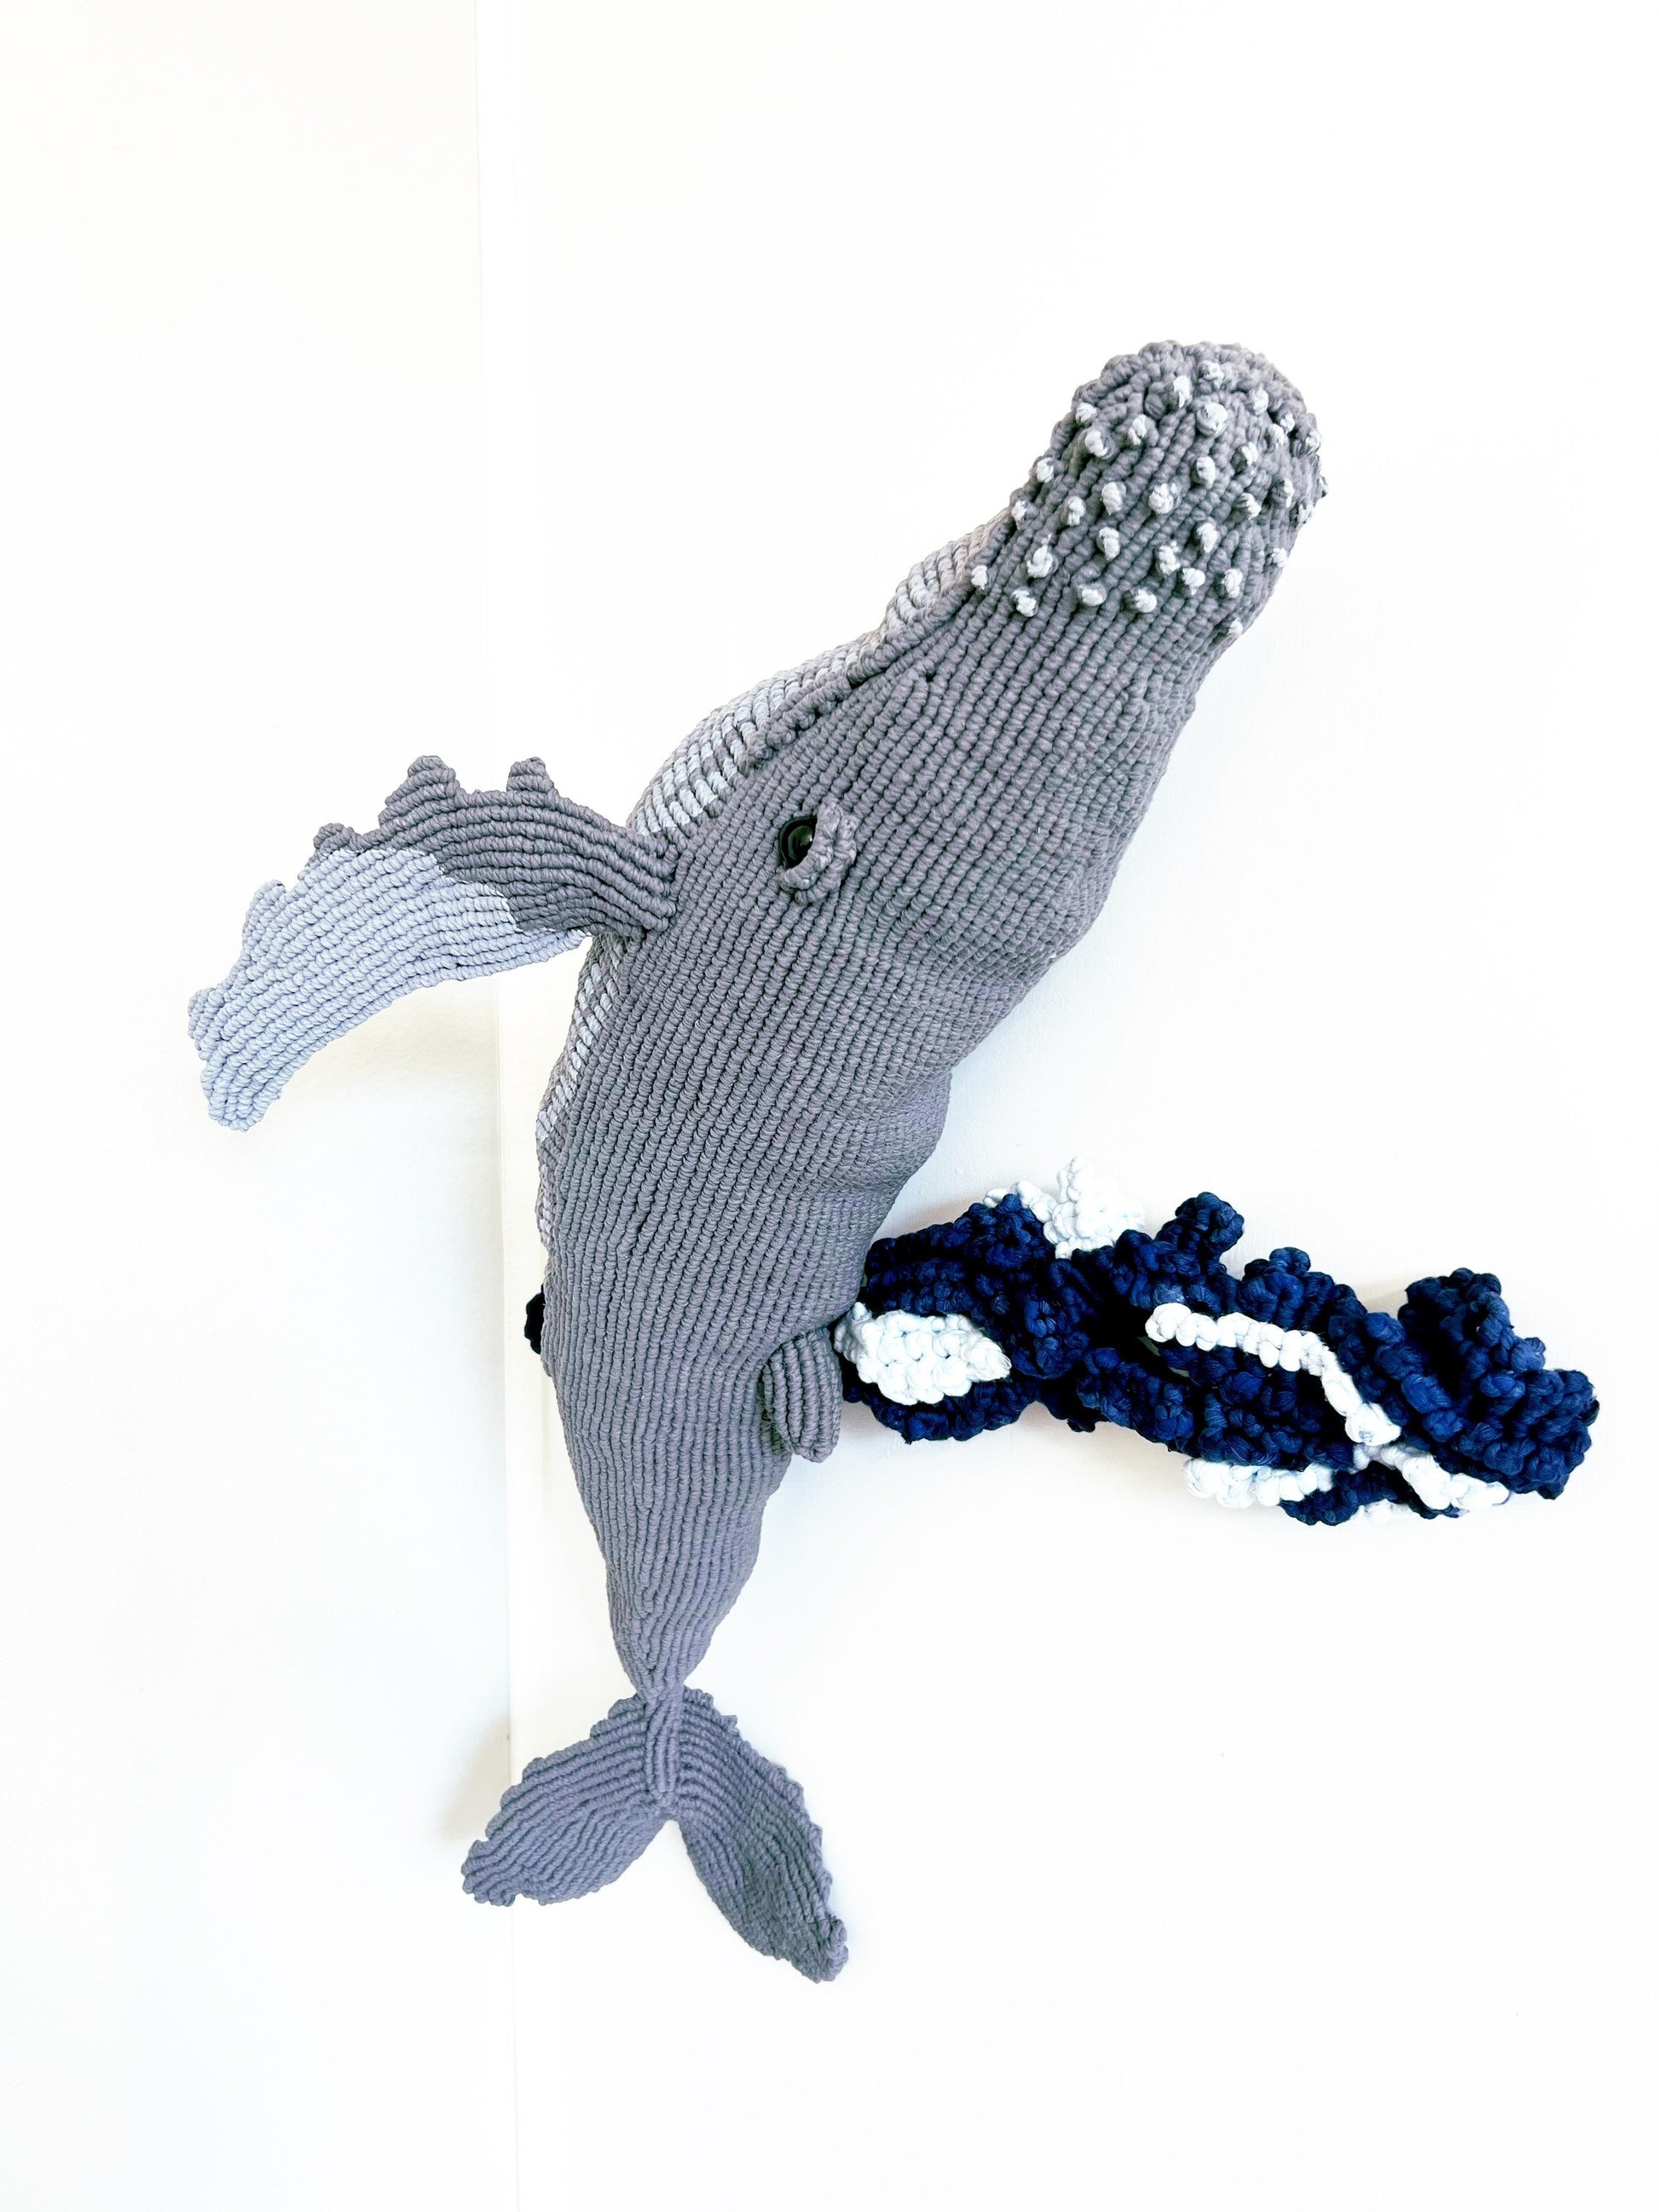 Macrame Humpback Whale Art/baby Mom and Baby Whale/ Whale Art/ Macrame Whale